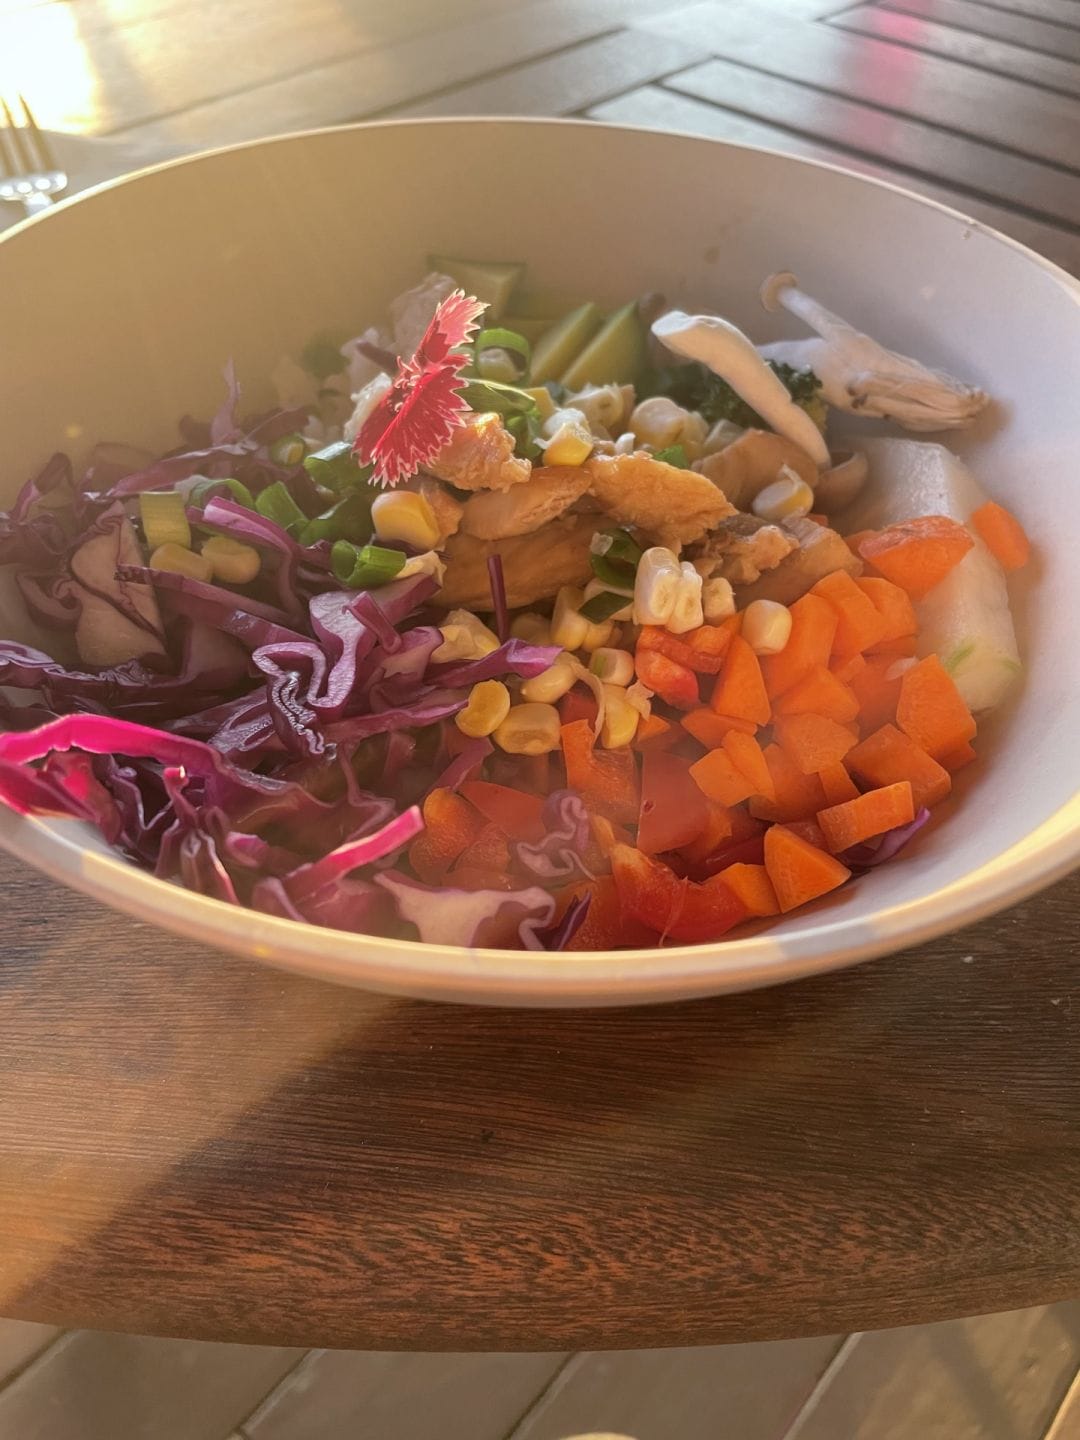 an earthen bowl of carrots, cabbage, corn, mushrooms, brussels sprouts on a wooden table